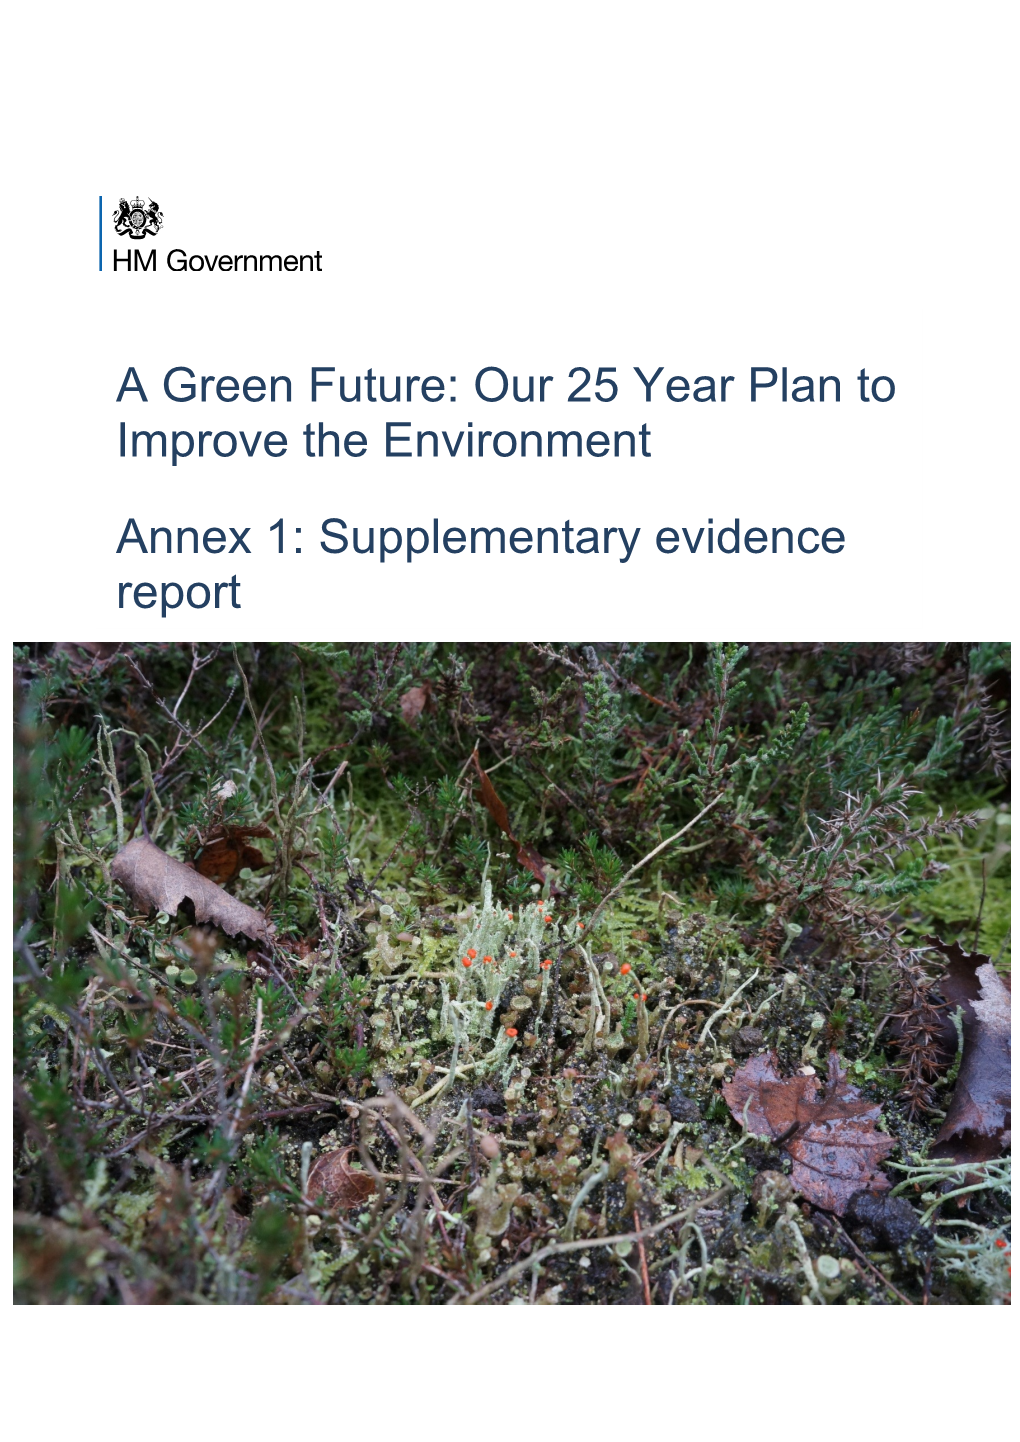 A Green Future: Our 25 Year Plan to Improve the Environment